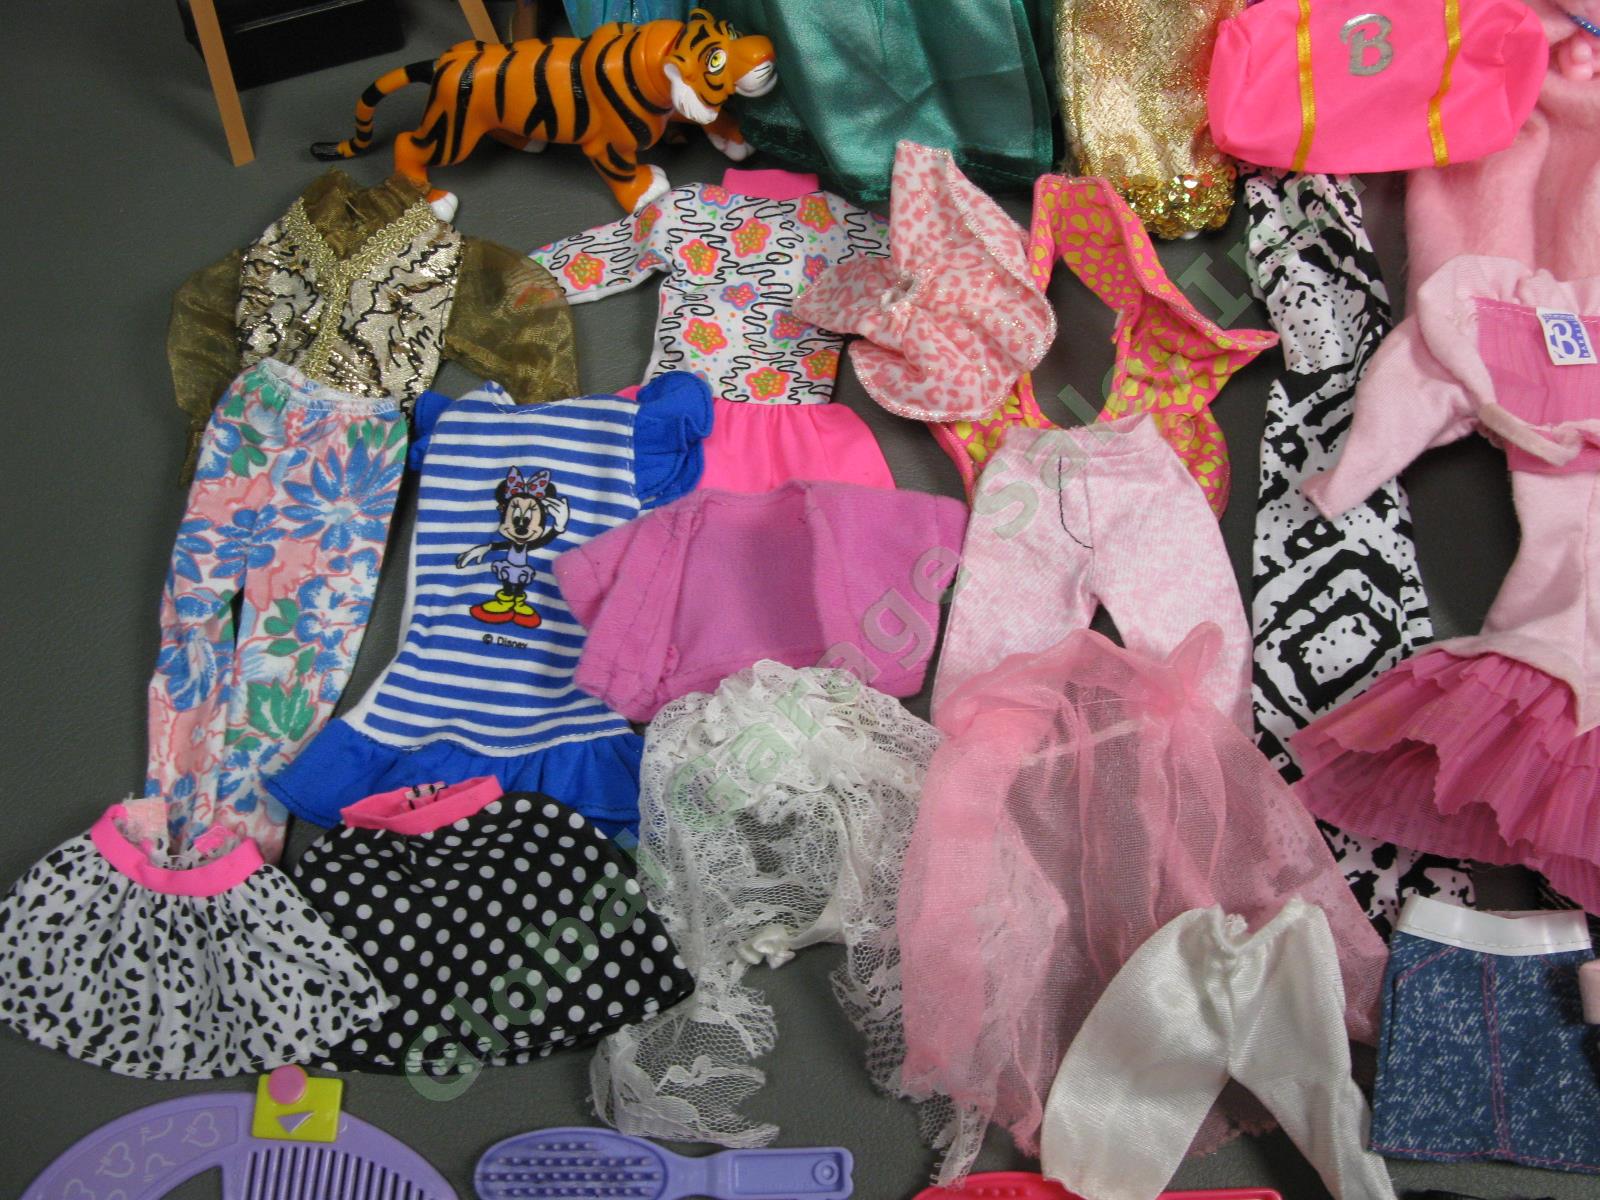 HUGE 29 1970s-1990s Barbie Doll Lot Horse Clothes Accessories Disney Collection 41